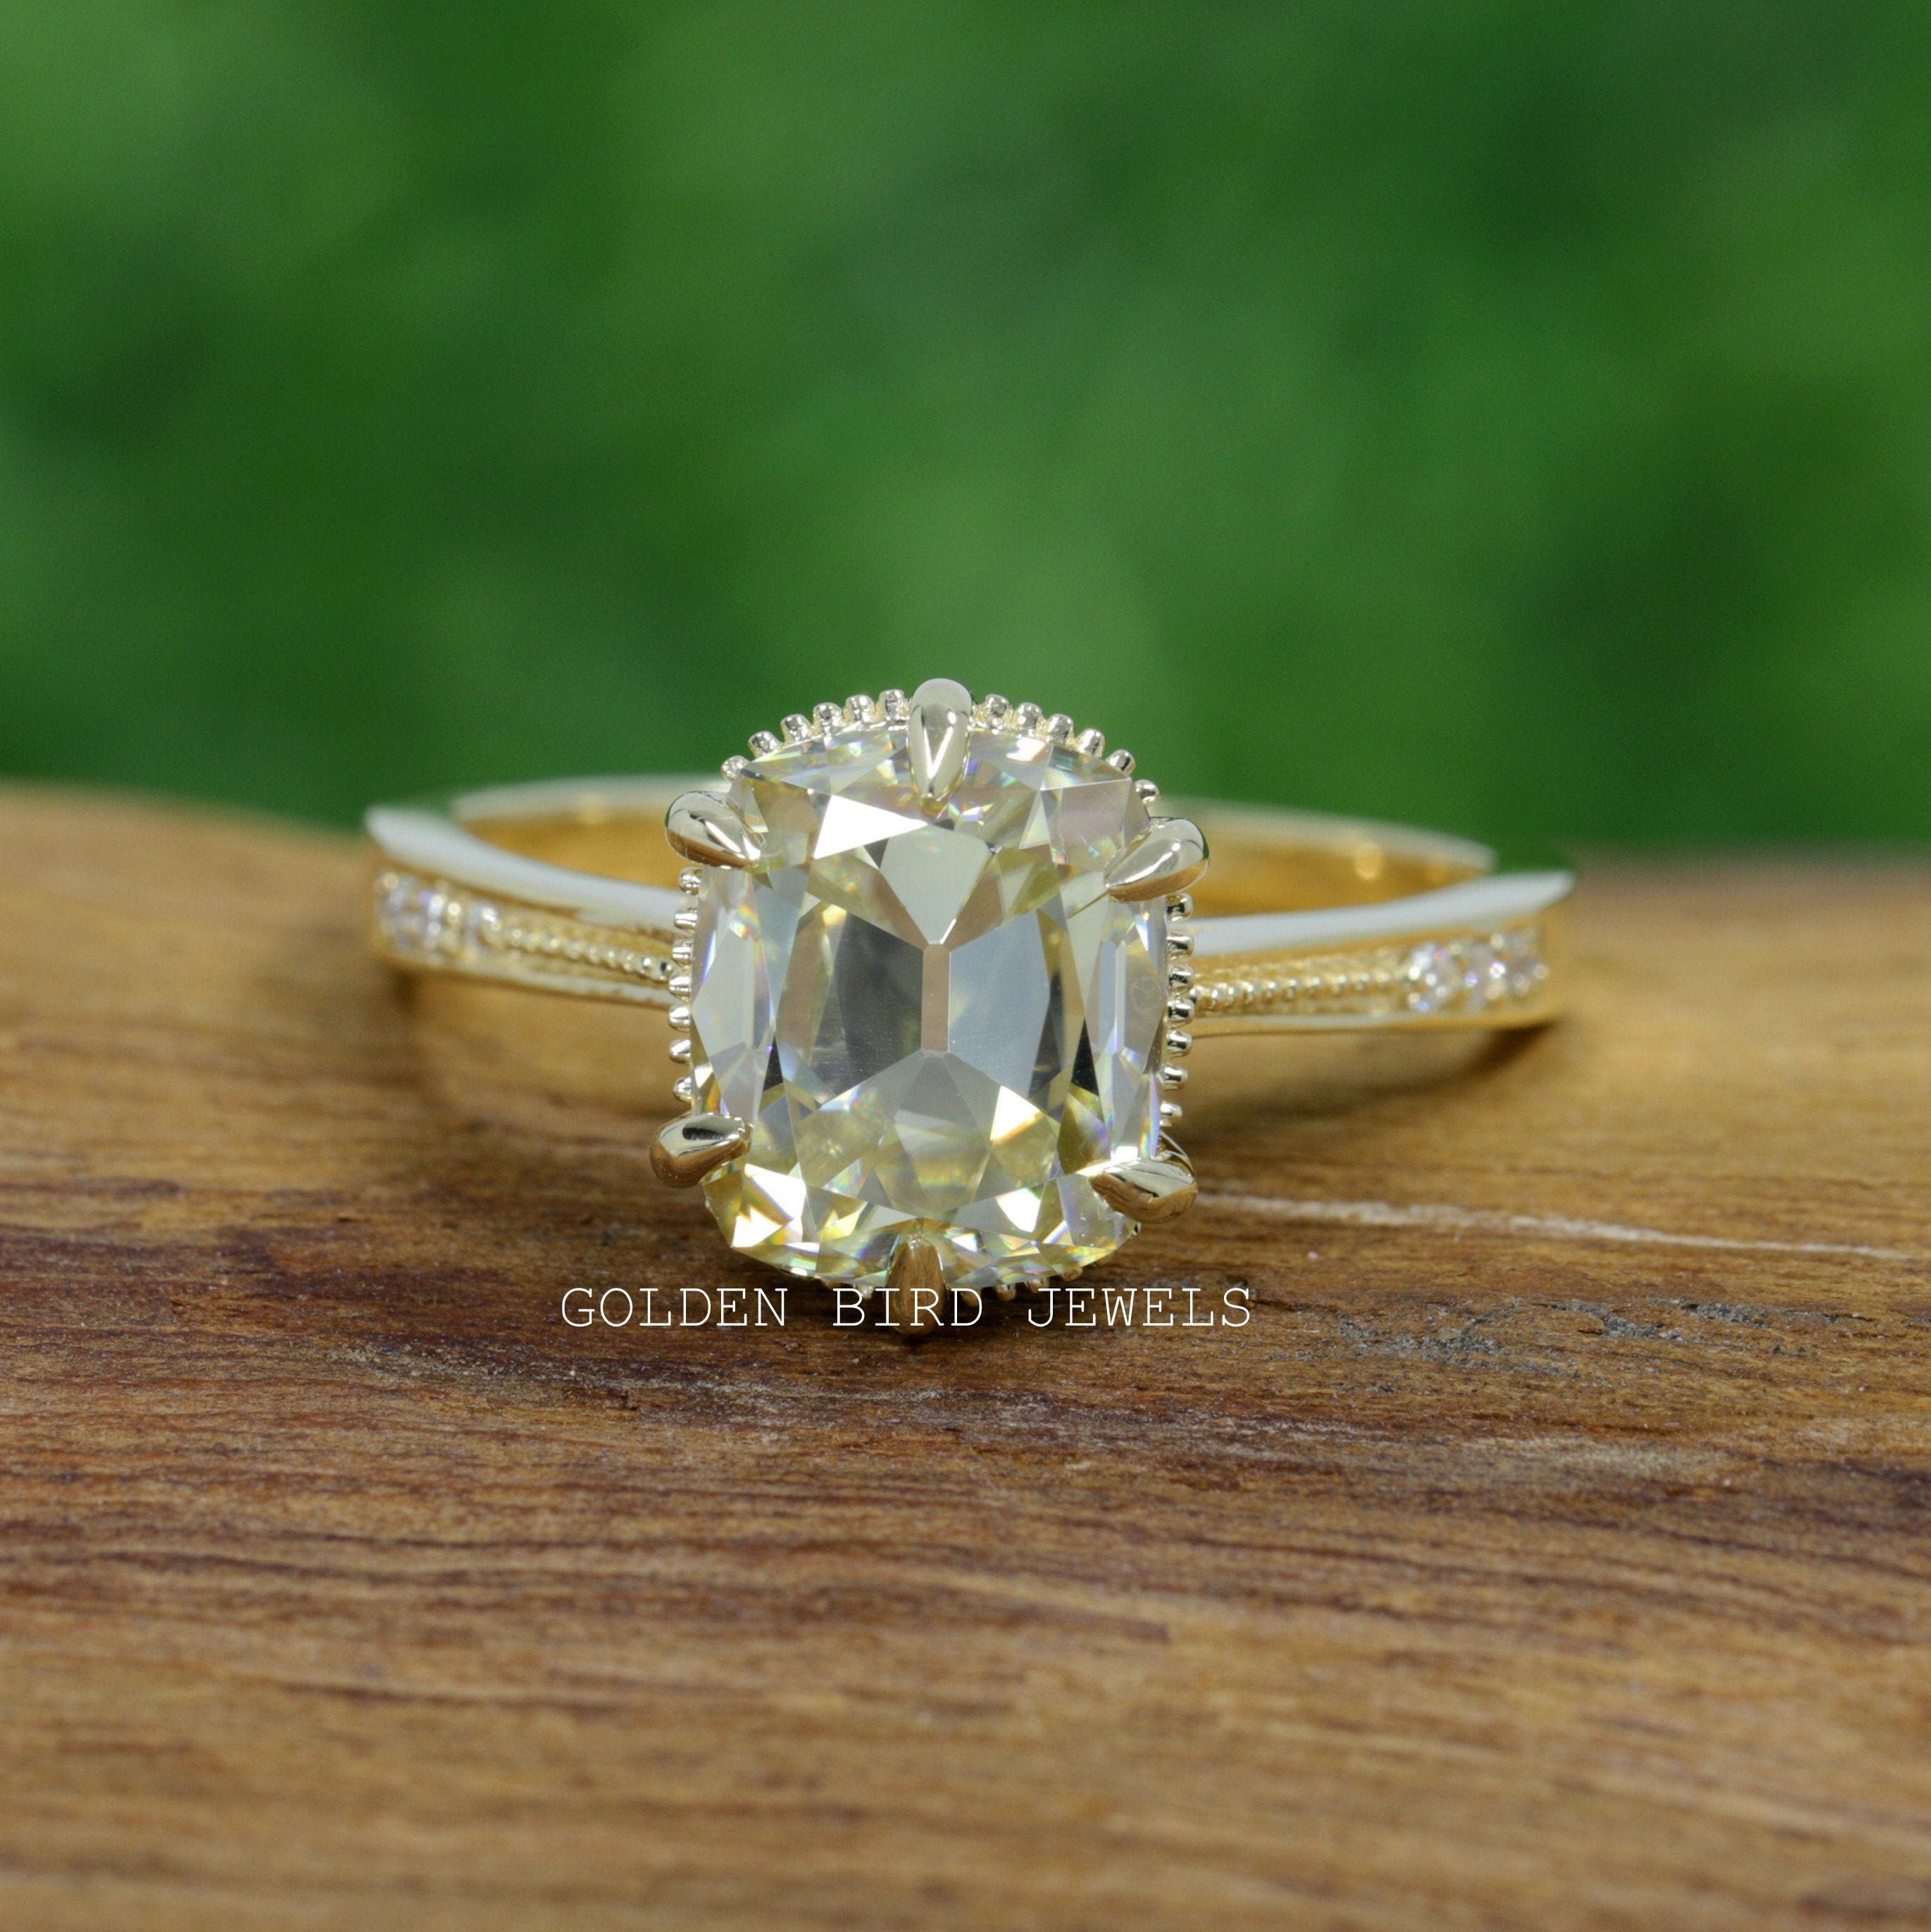 Old Mine Cushion Cut Ring  Best Solitaire Accent Vintage Ring  14KT Gold Moissanite Engagement Ring  Pretty Ring For Someone Special